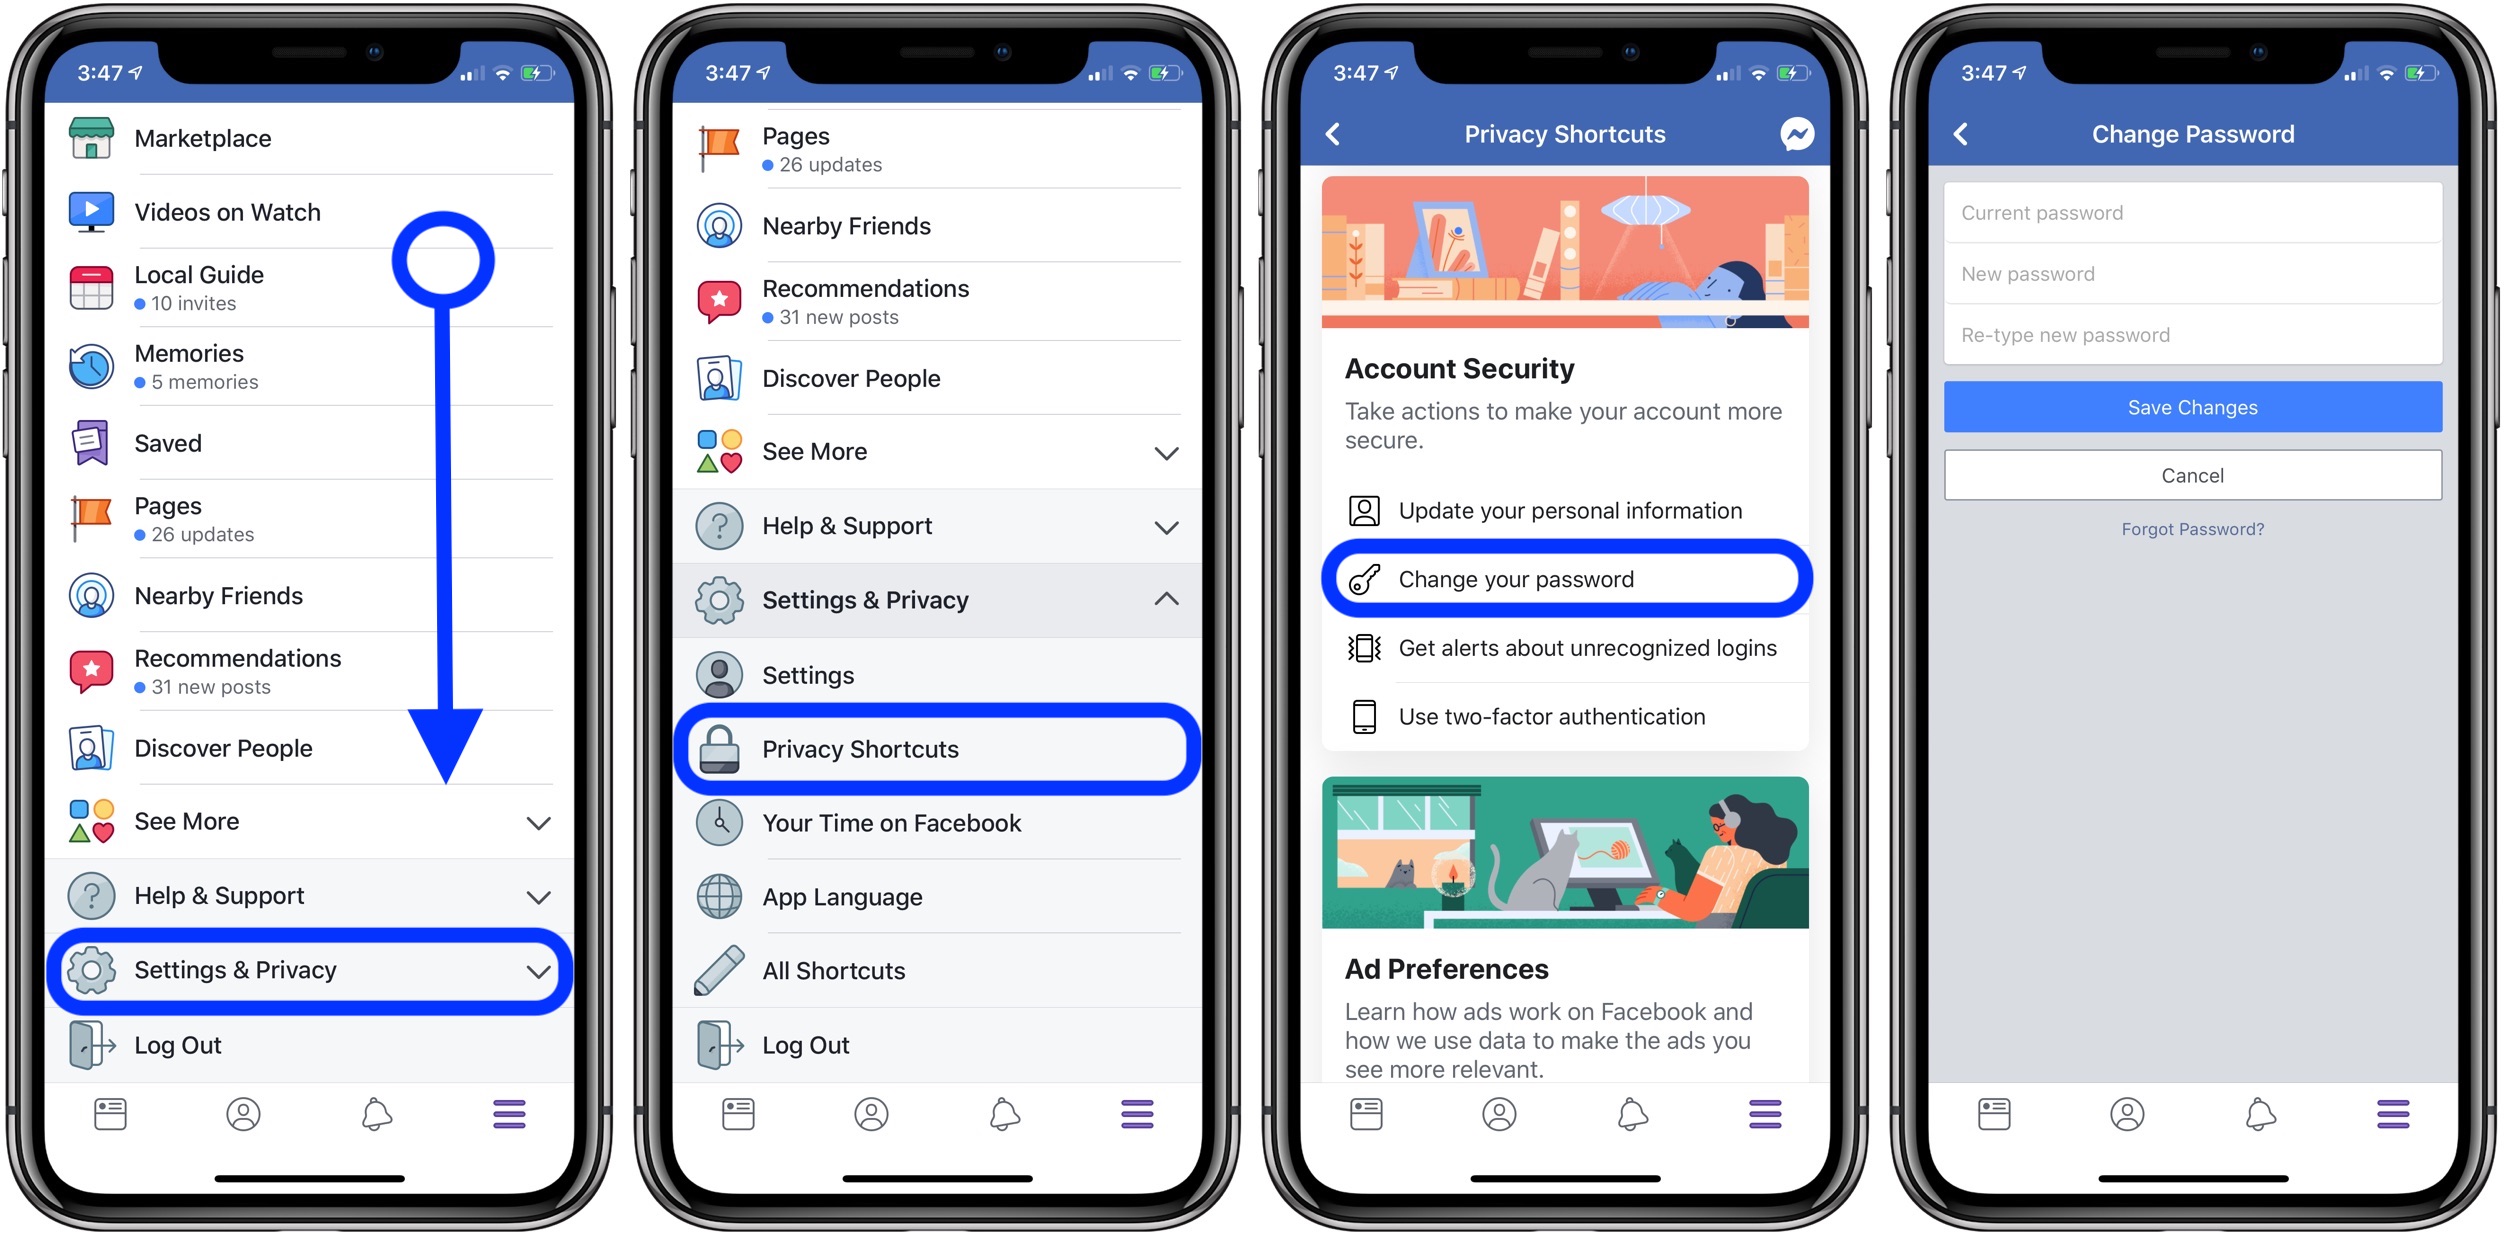 How to change your Facebook password on iPhone - 9to5Mac